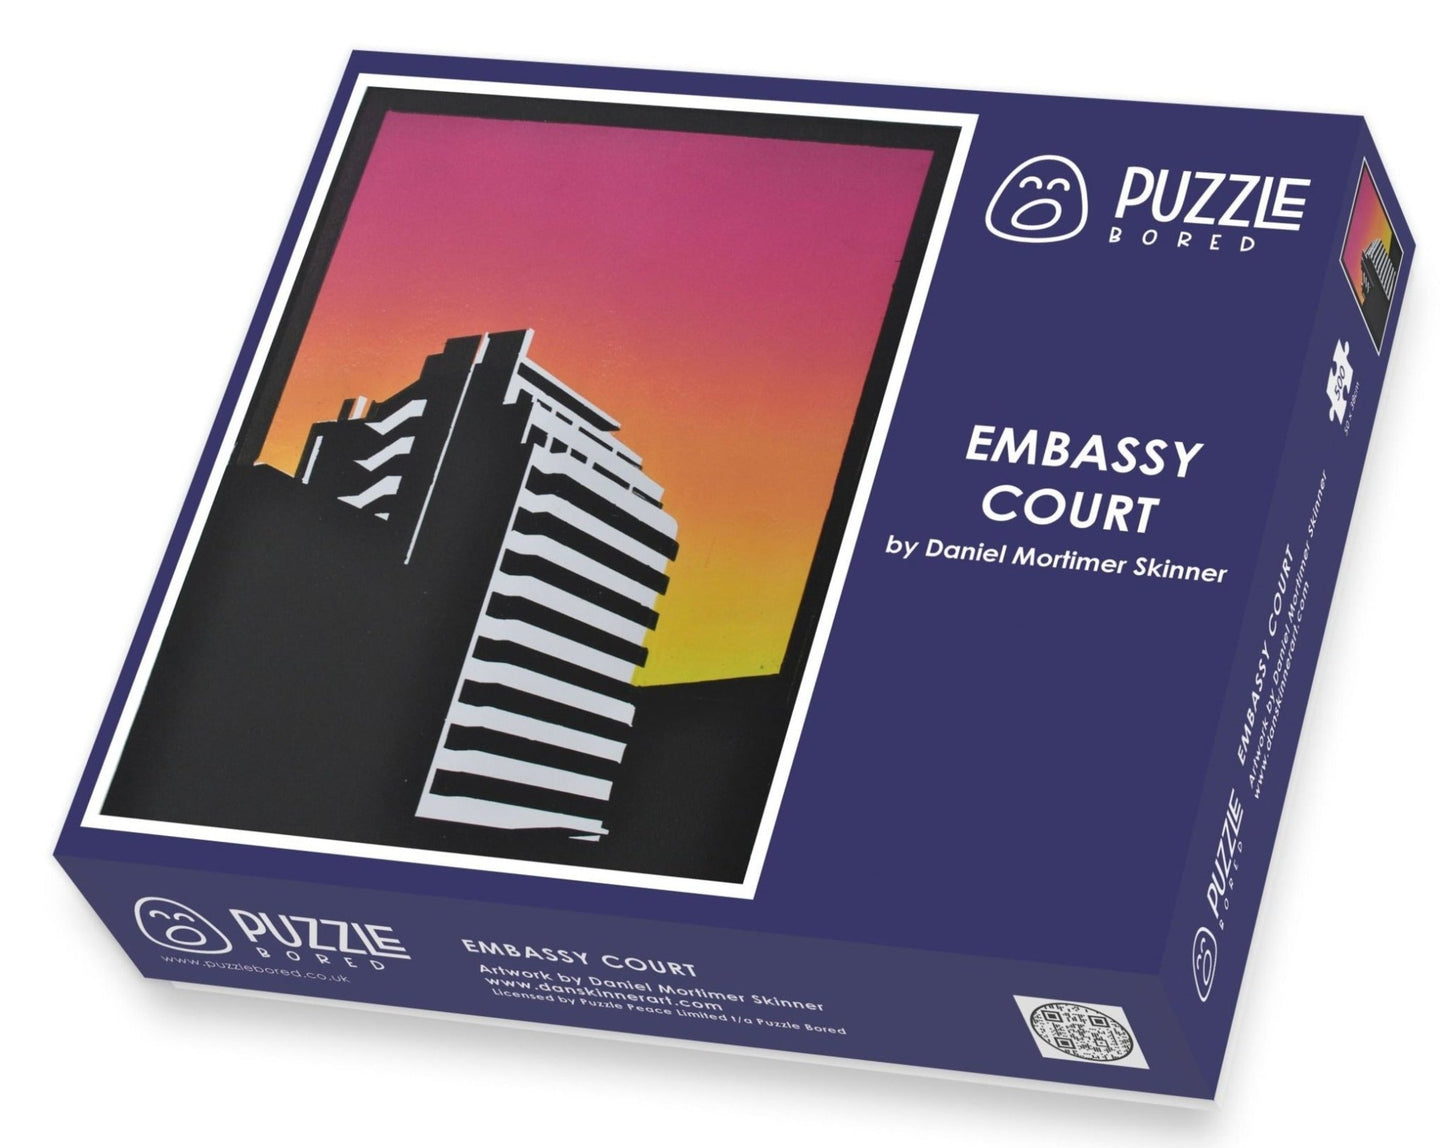 Embassy Court by Daniel Mortimer Skinner - Puzzle Bored